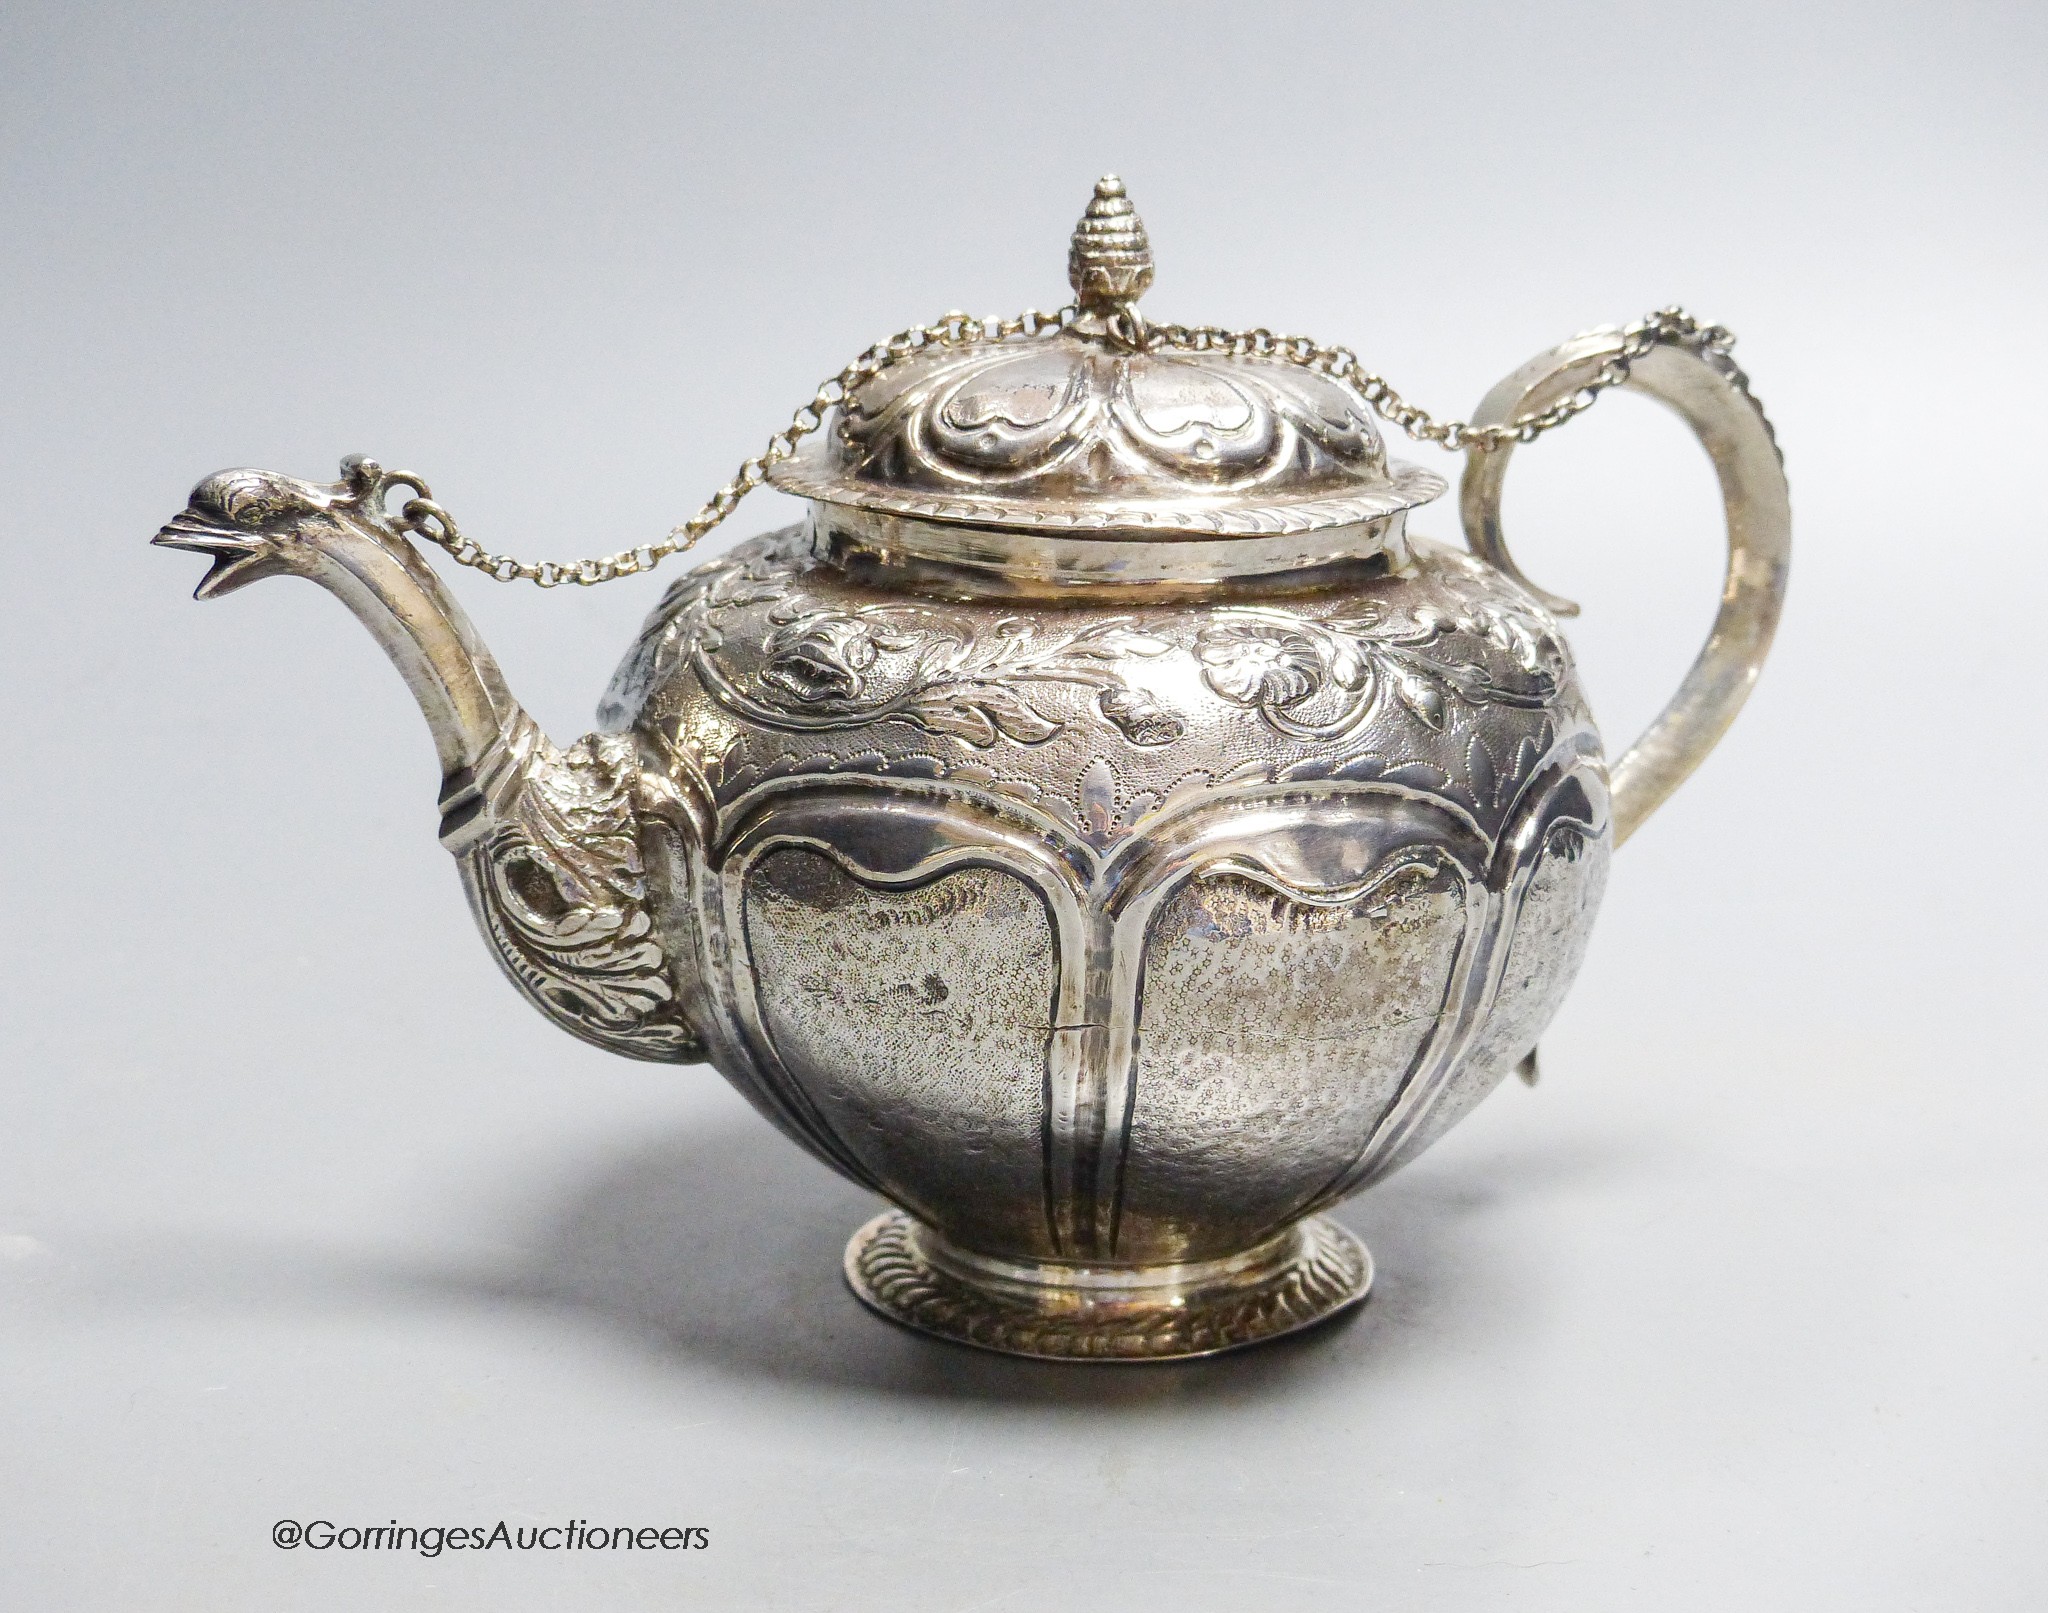 A late 18th/early 19th century Dutch? embossed white metal teapot, 13.5cm, gross 11.5oz